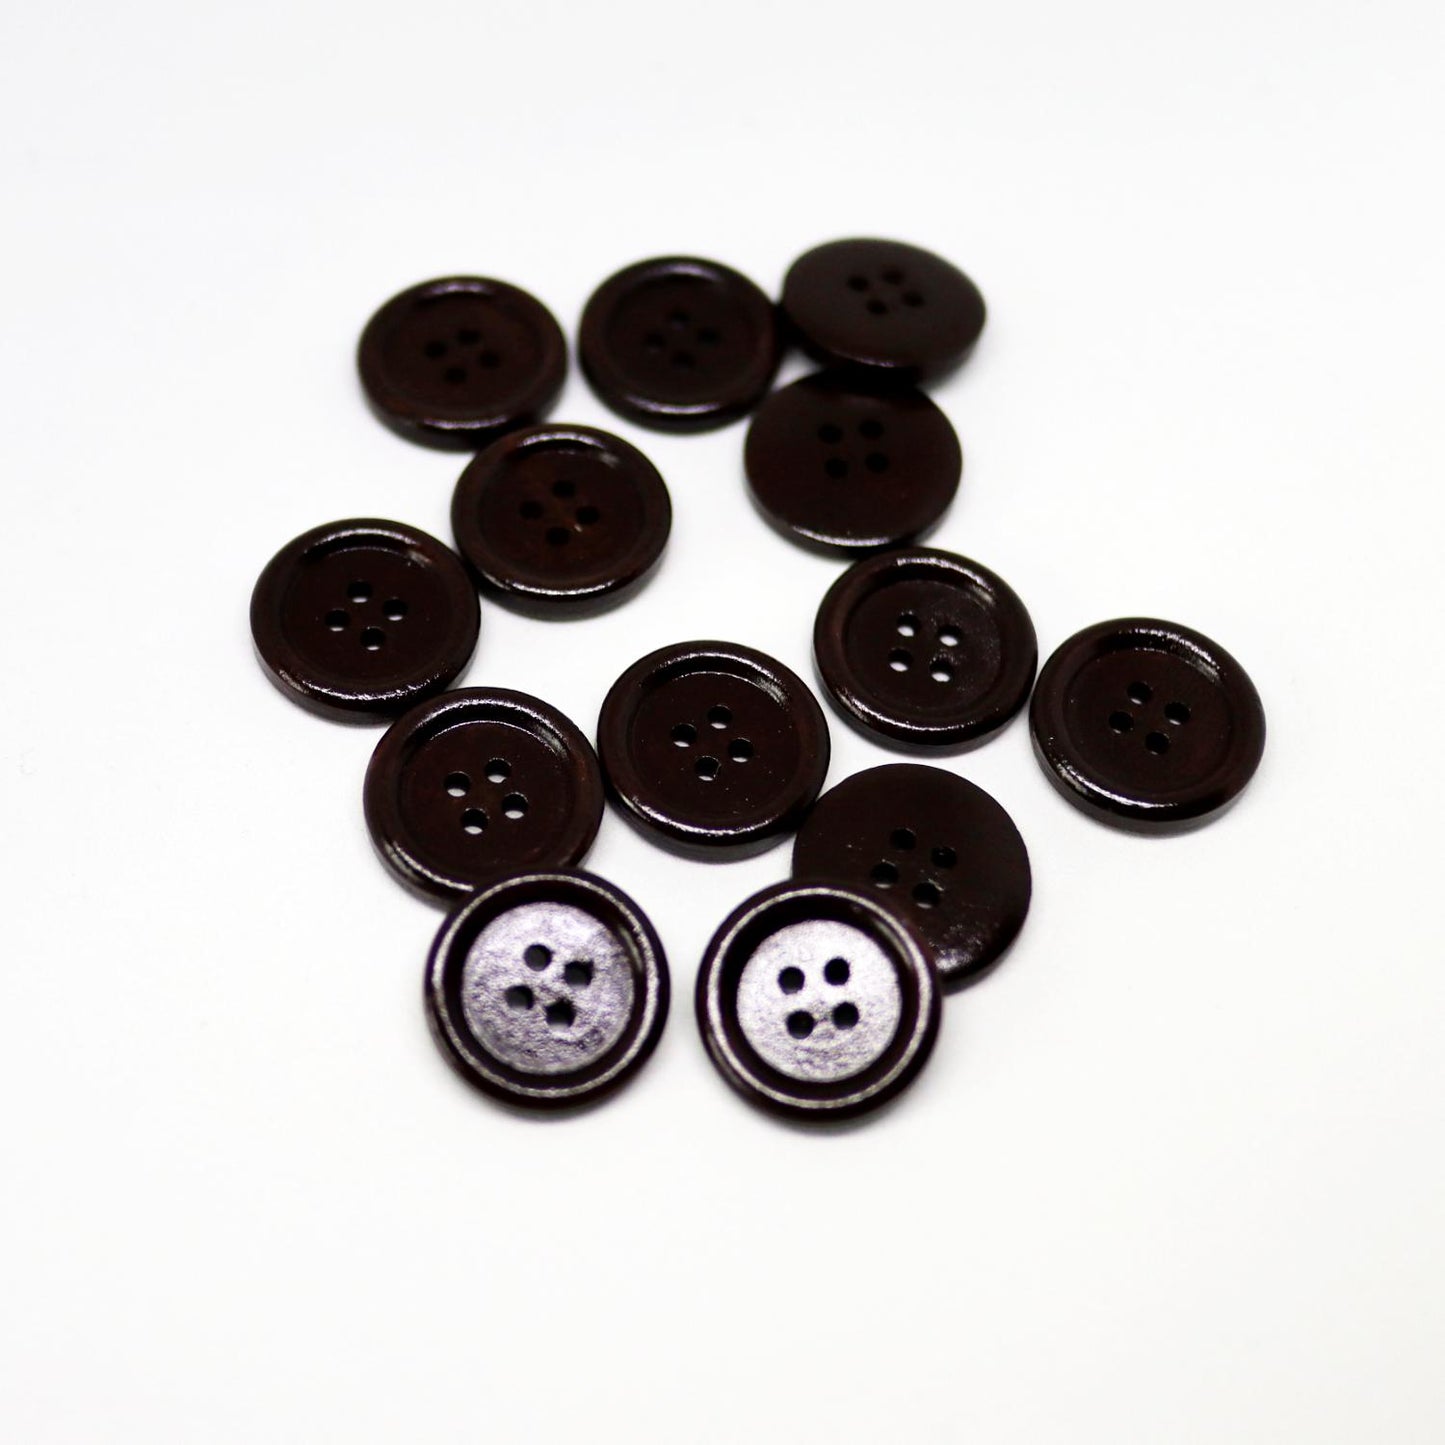 Shiny natural wood buttons, dark brown 20 mm